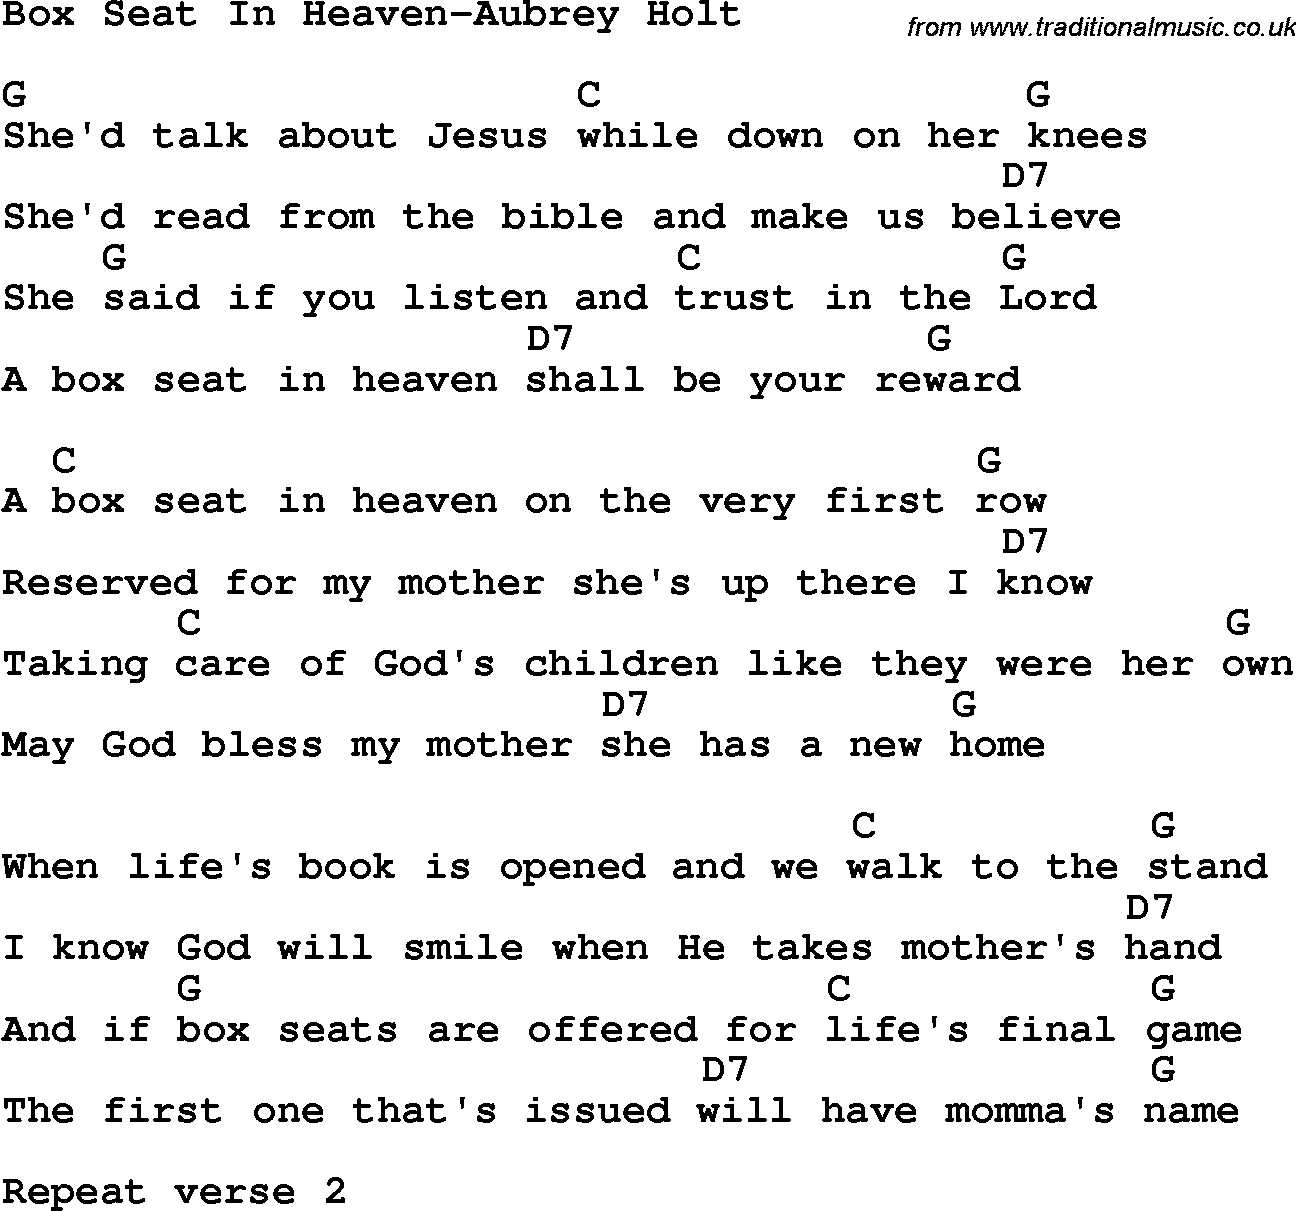 Country, Southern and Bluegrass Gospel Song Box Seat In Heaven-Aubrey Holt lyrics and chords